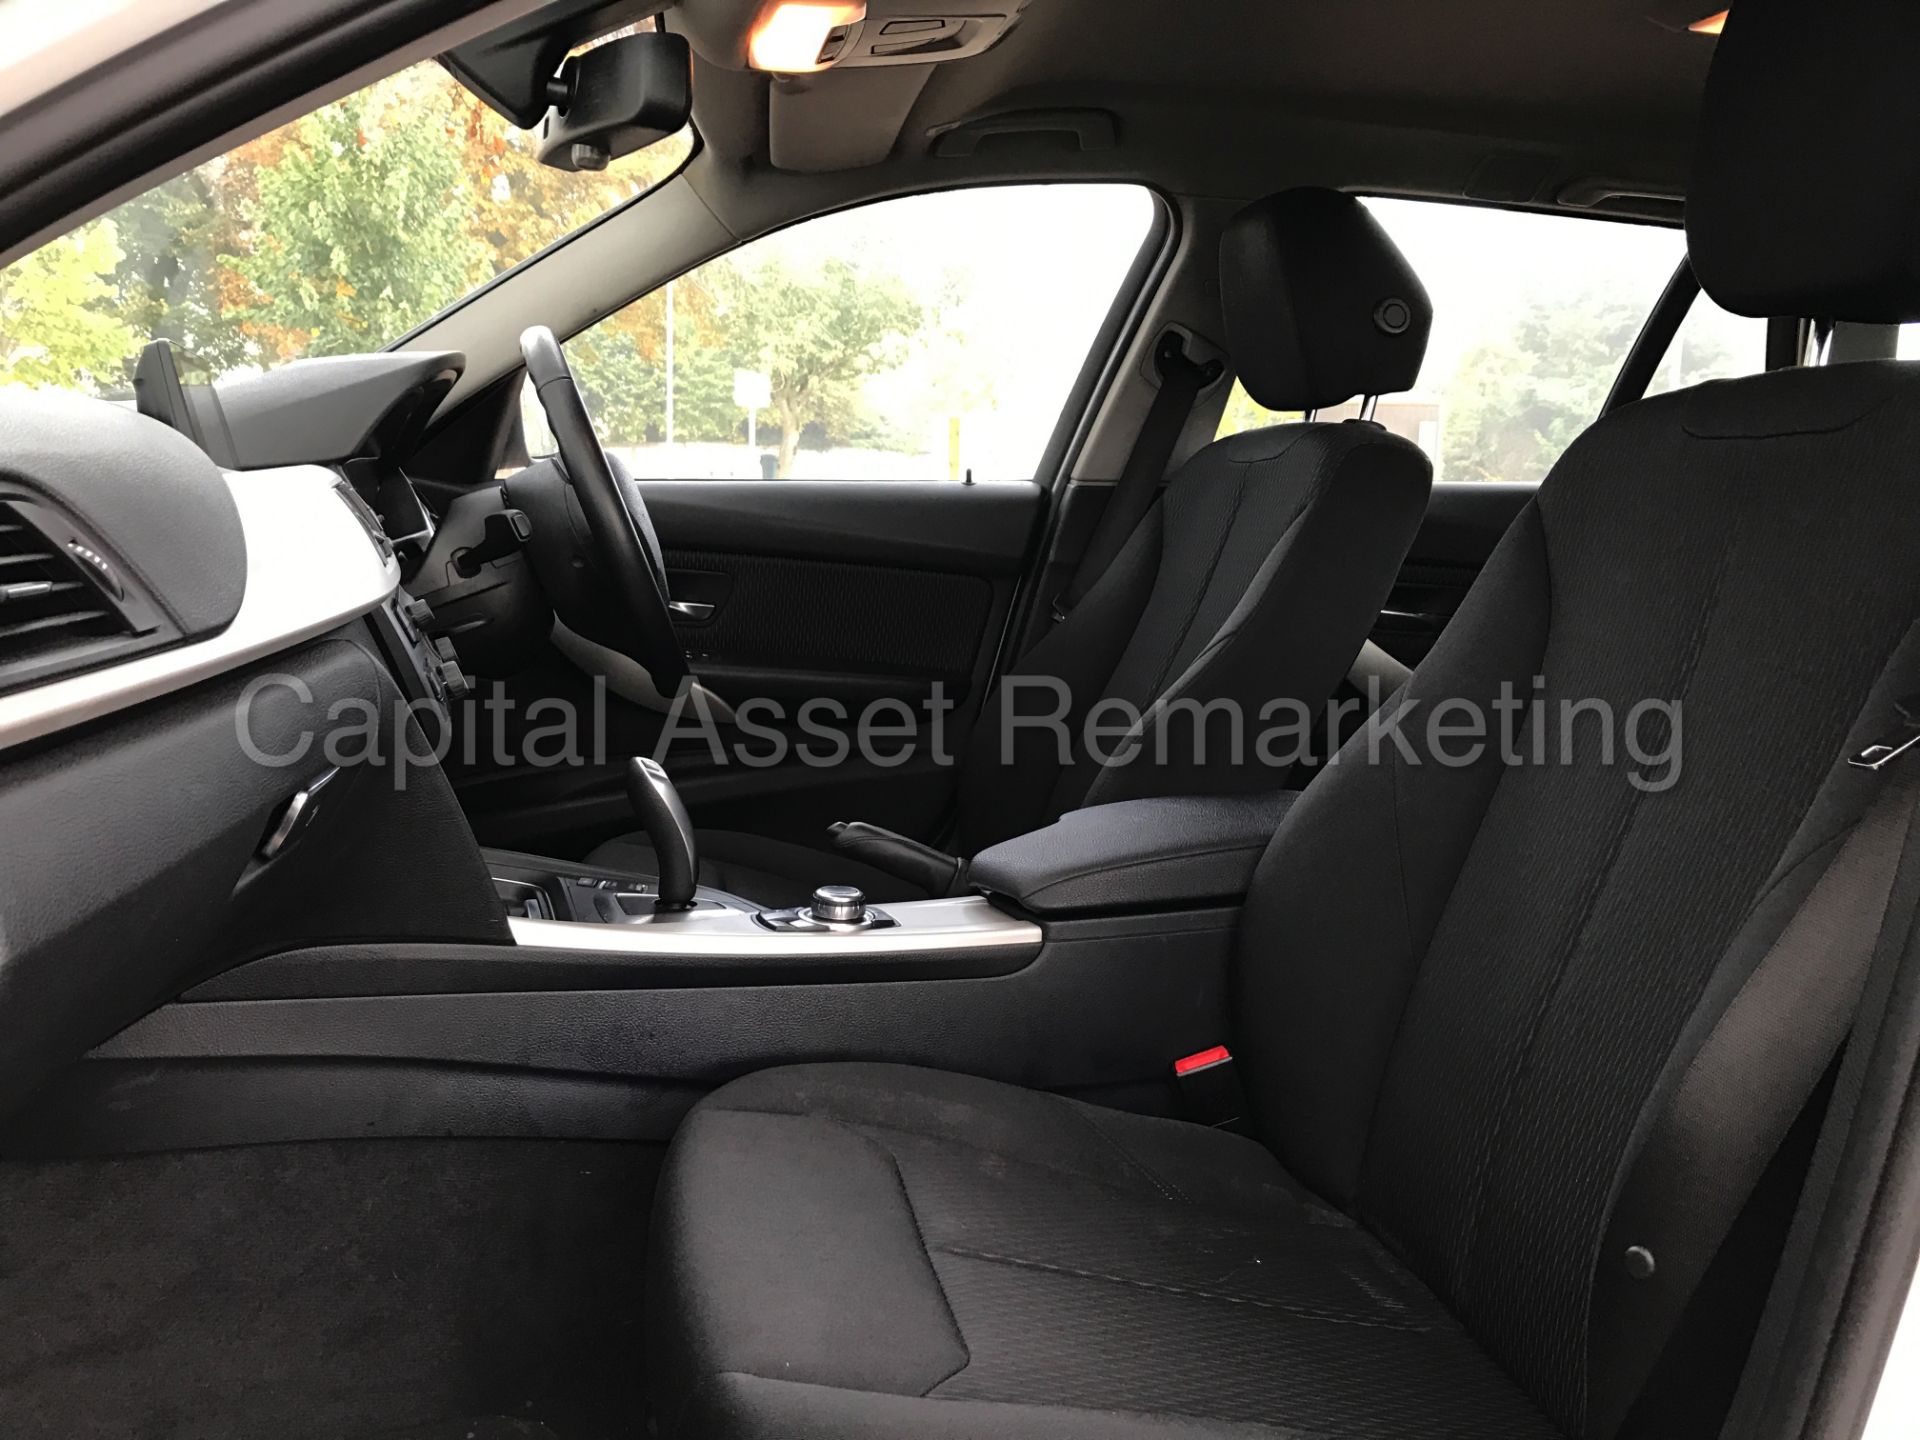 BMW 320d 'ESTATE / TOURING' (2014 MODEL) 8 SPEED AUTO - SAT NAV **FULLY LOADED** (1 OWNER FROM NEW) - Image 21 of 25